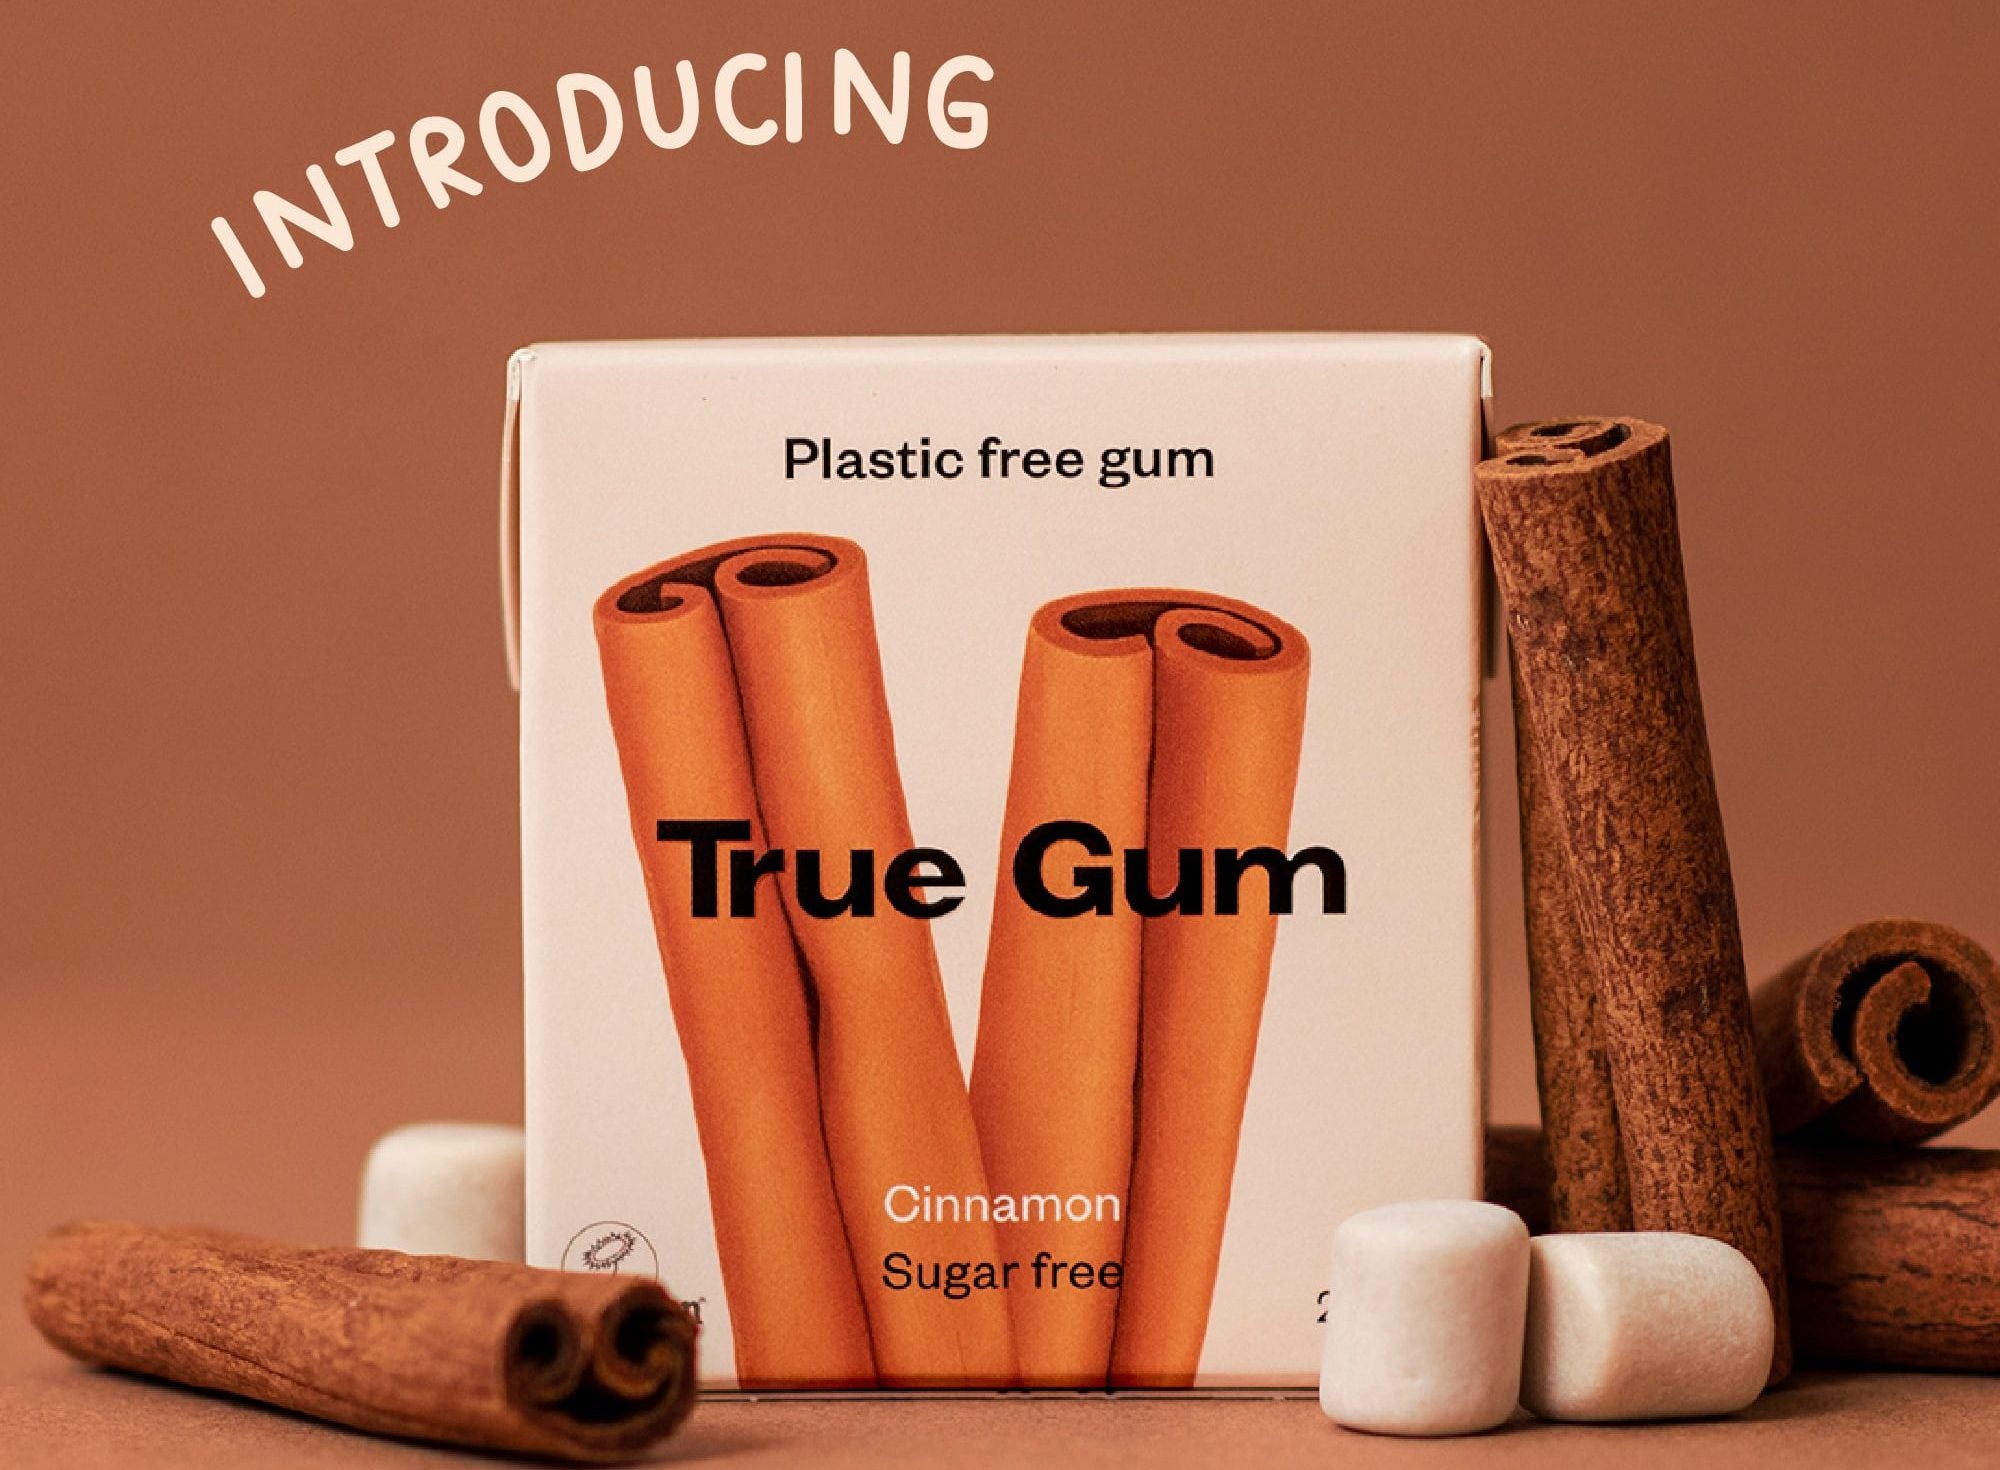 Humble adds to M&A spree with plastic-free True Gum